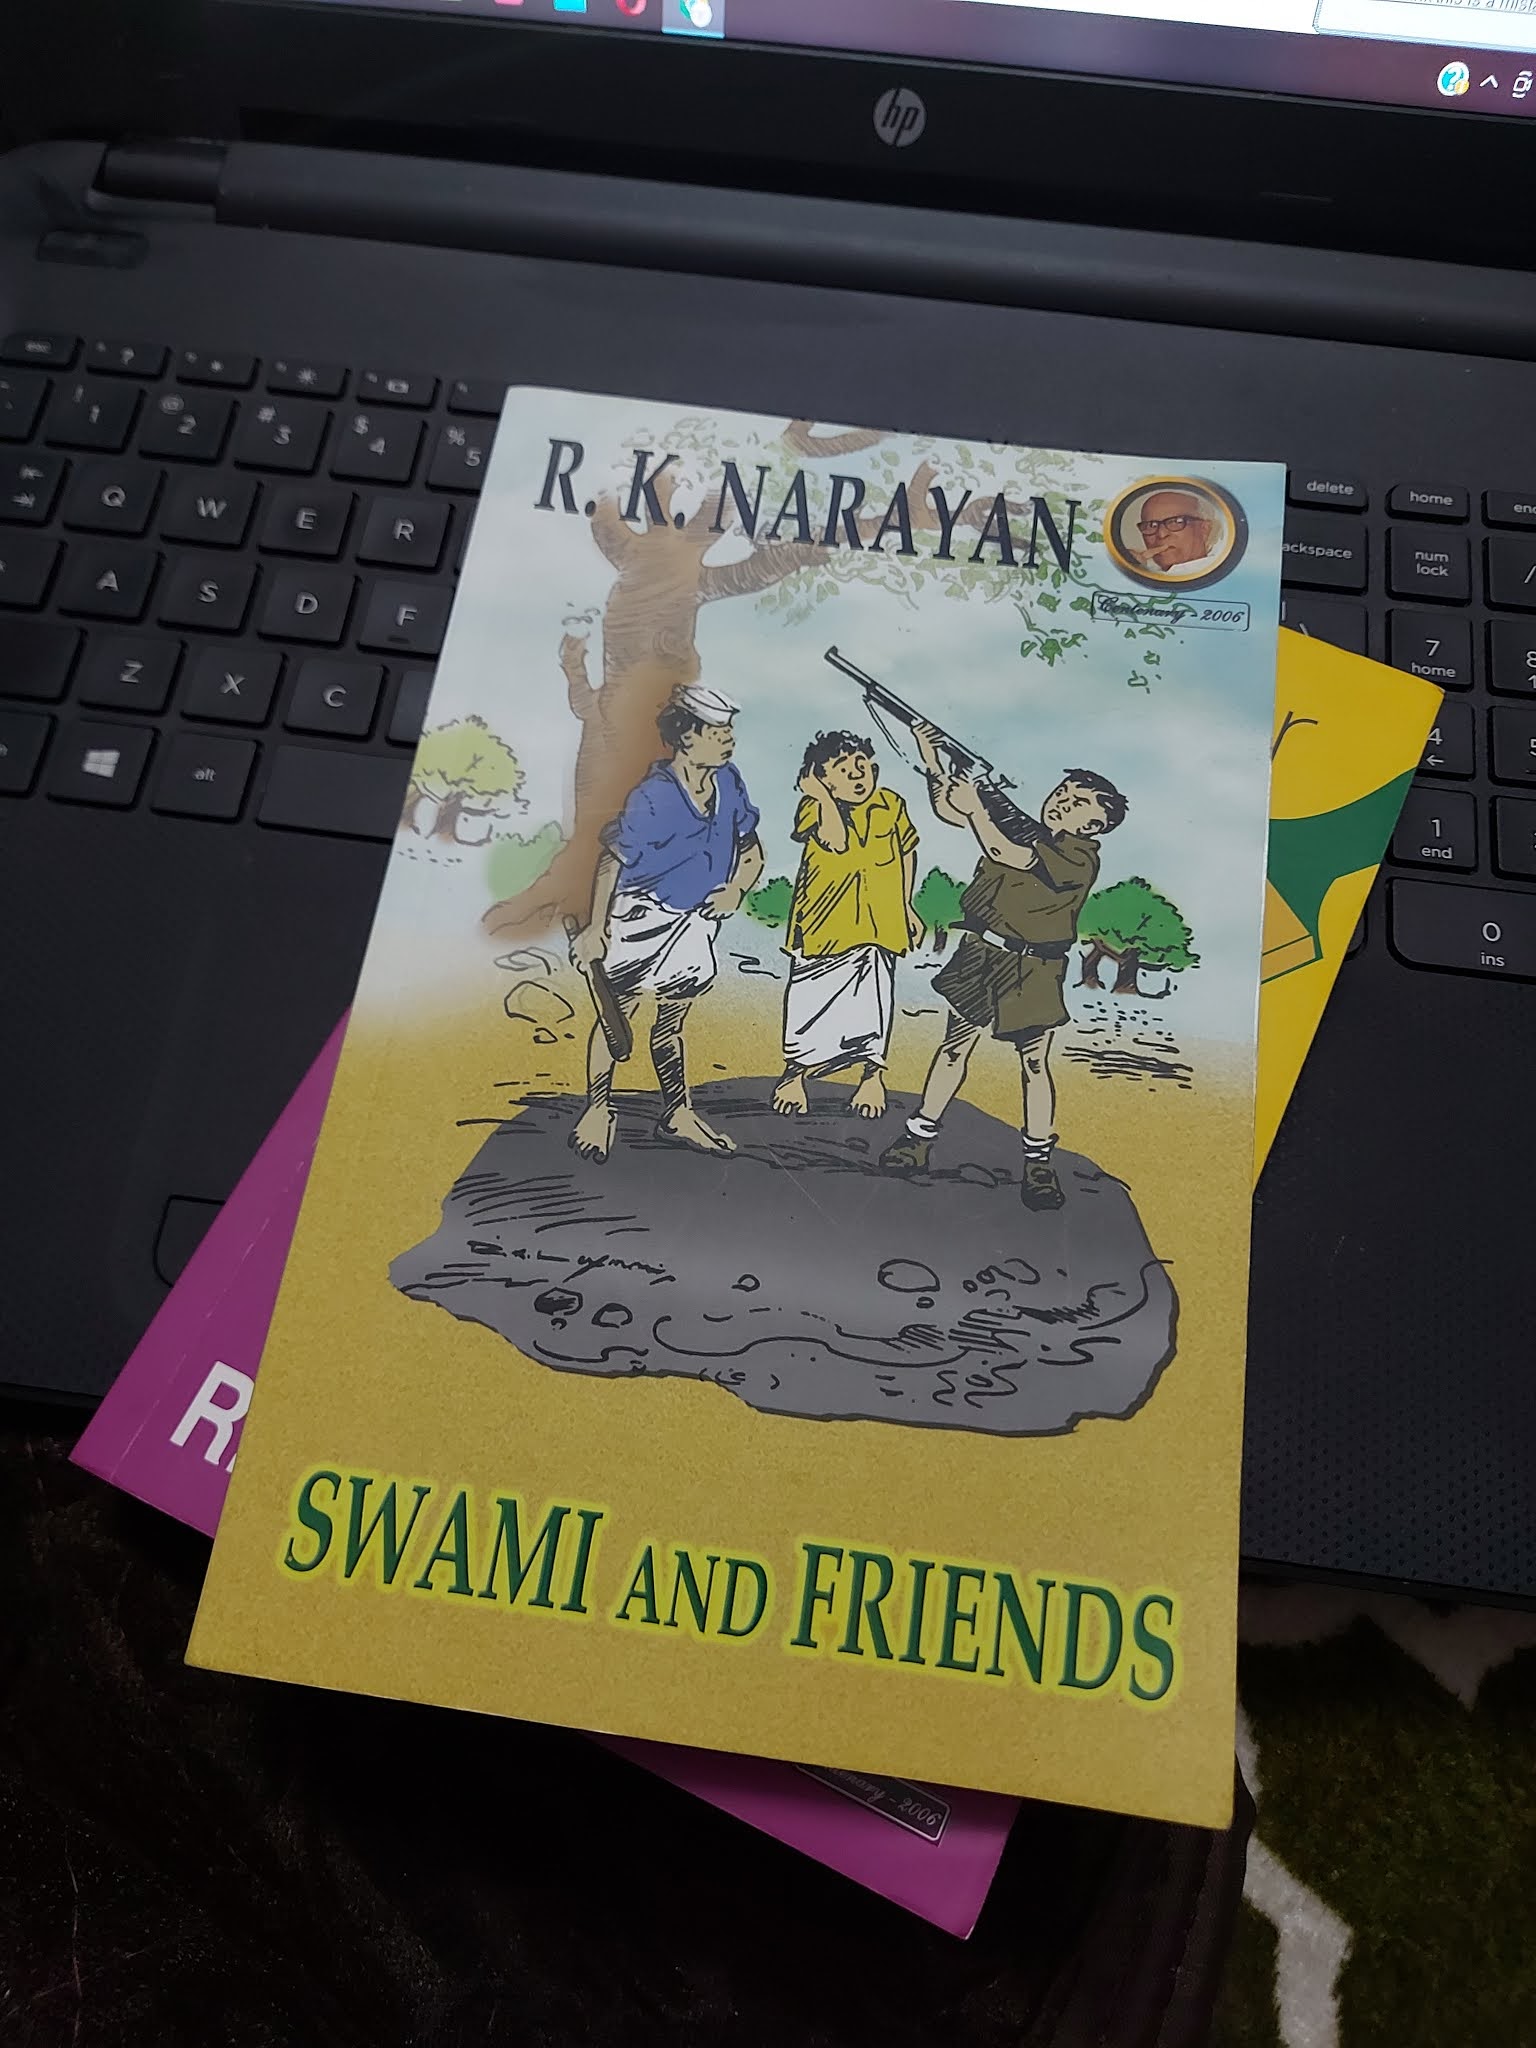 book review on swami and friends